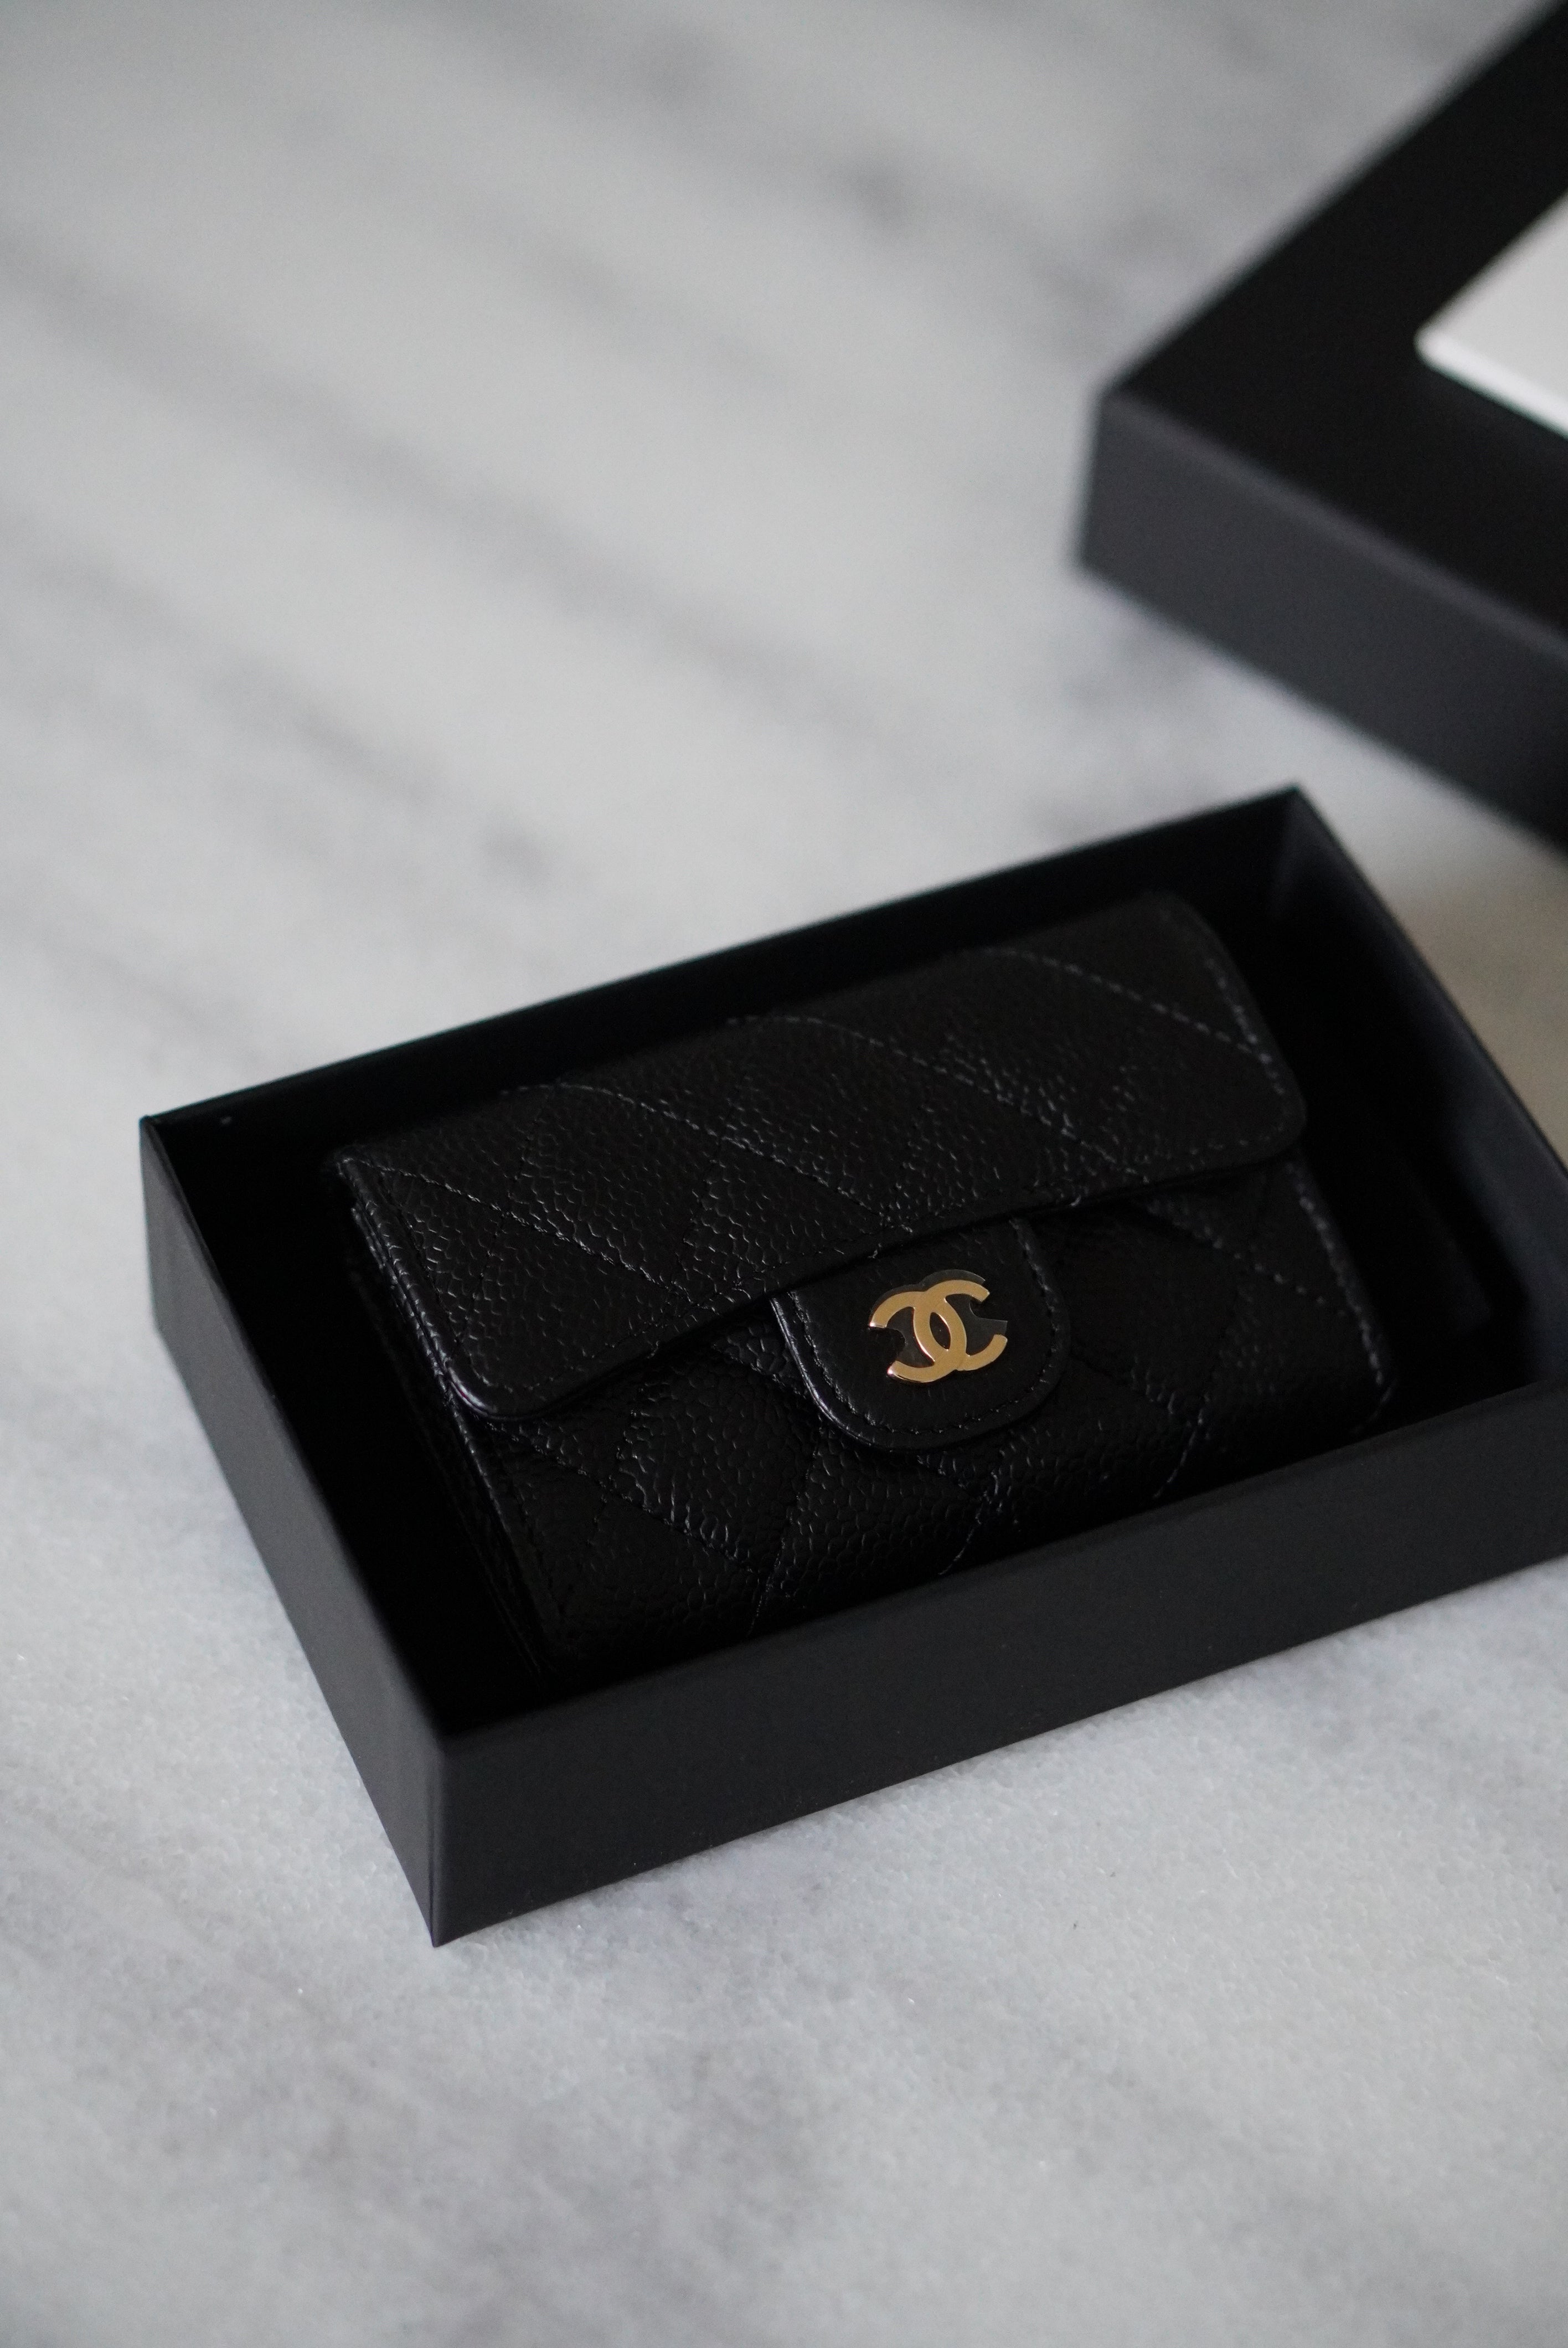 CHANEL CLASSIC CARD HOLDER / CARD WALLET